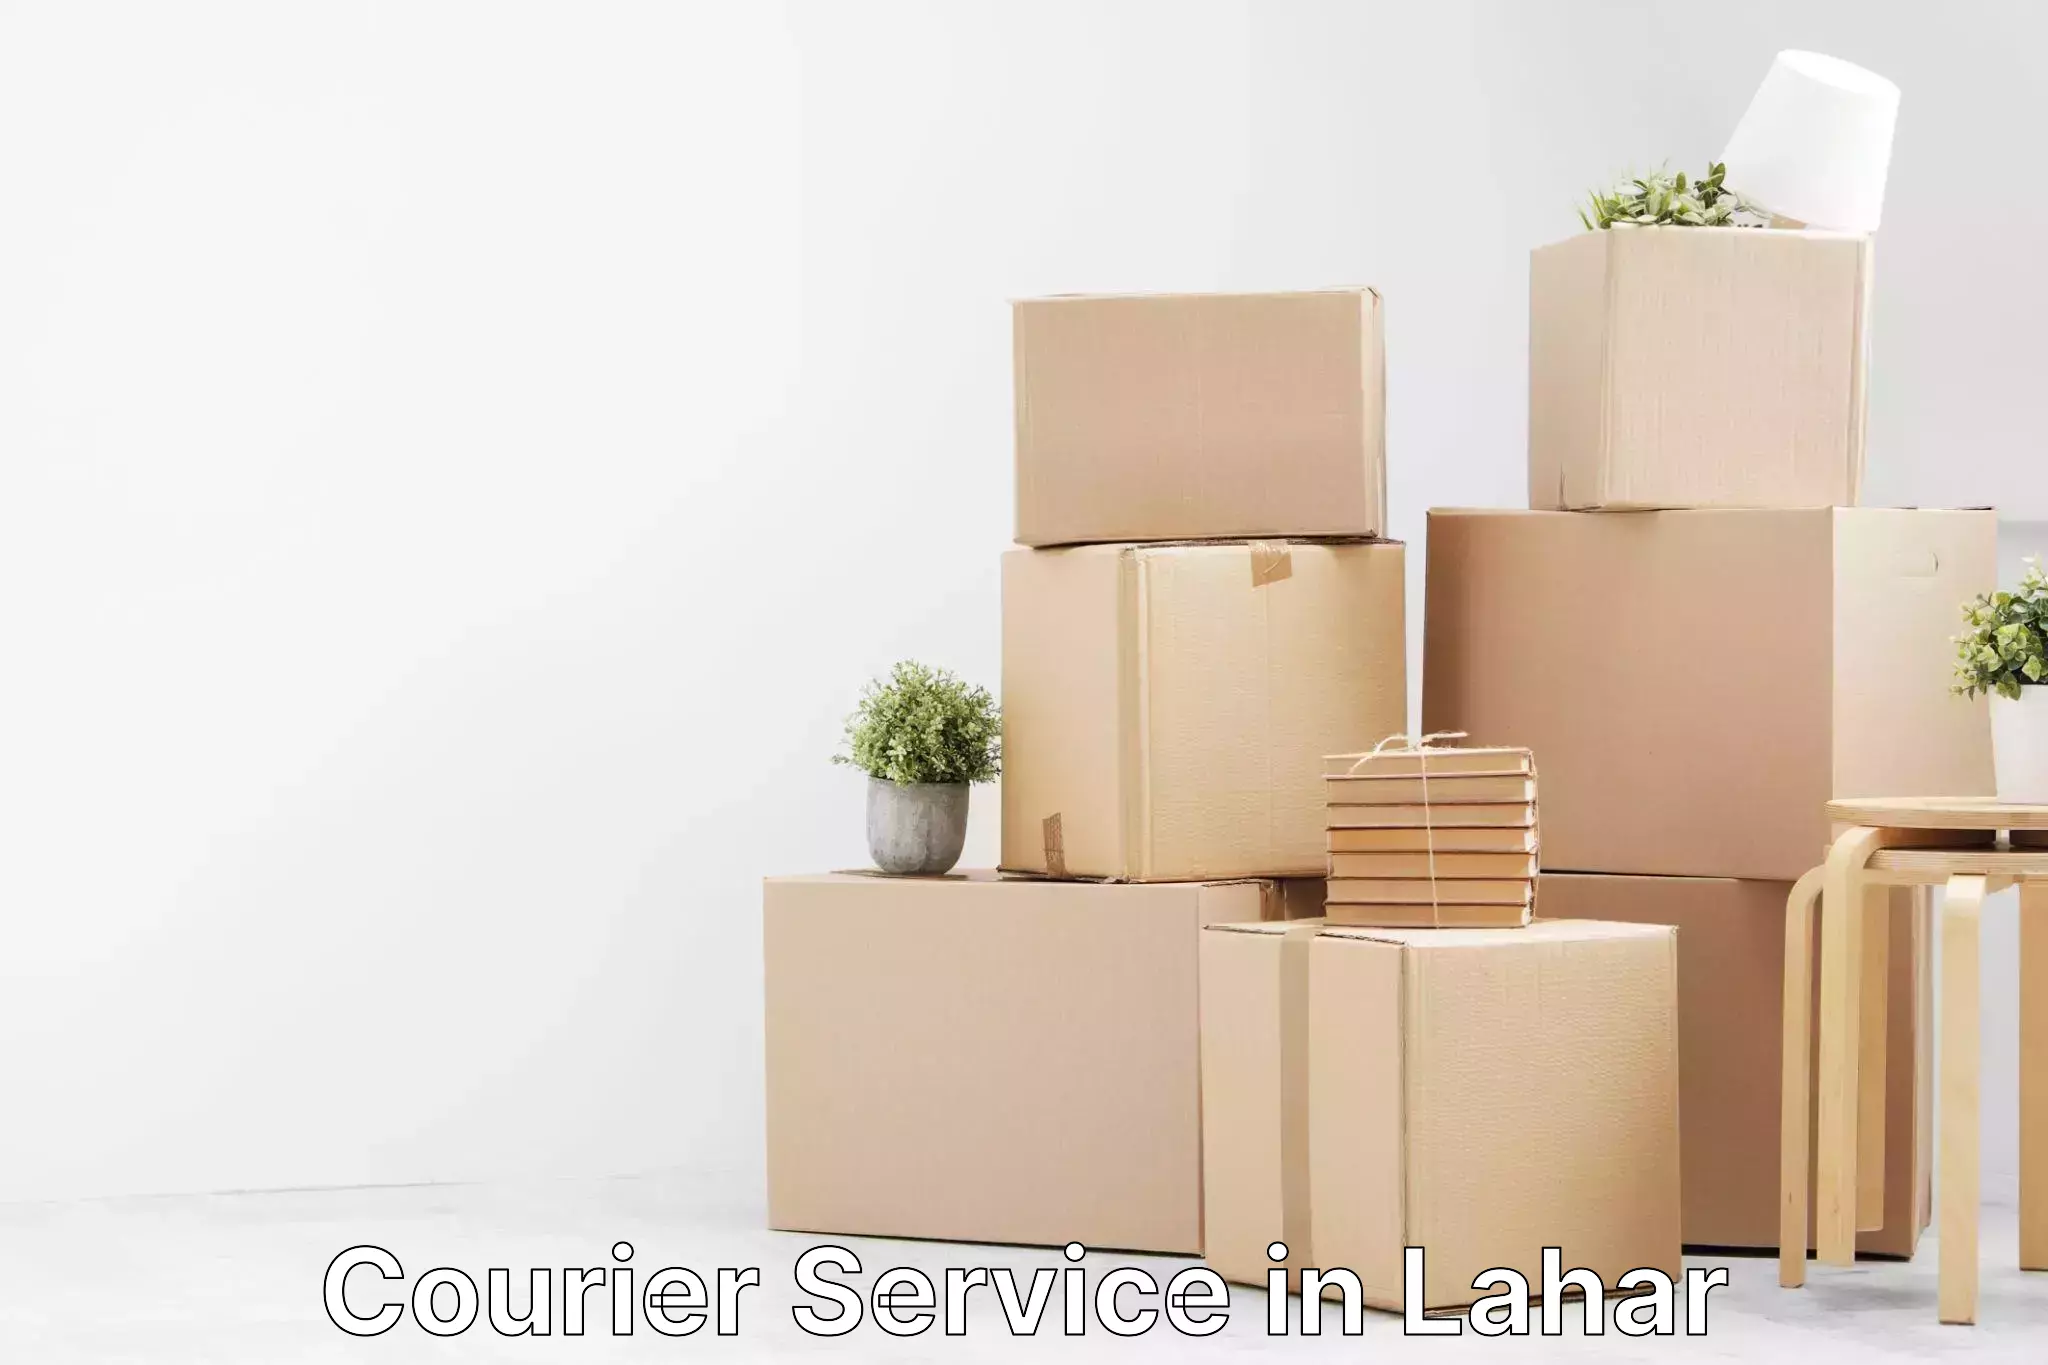 24-hour courier service in Lahar